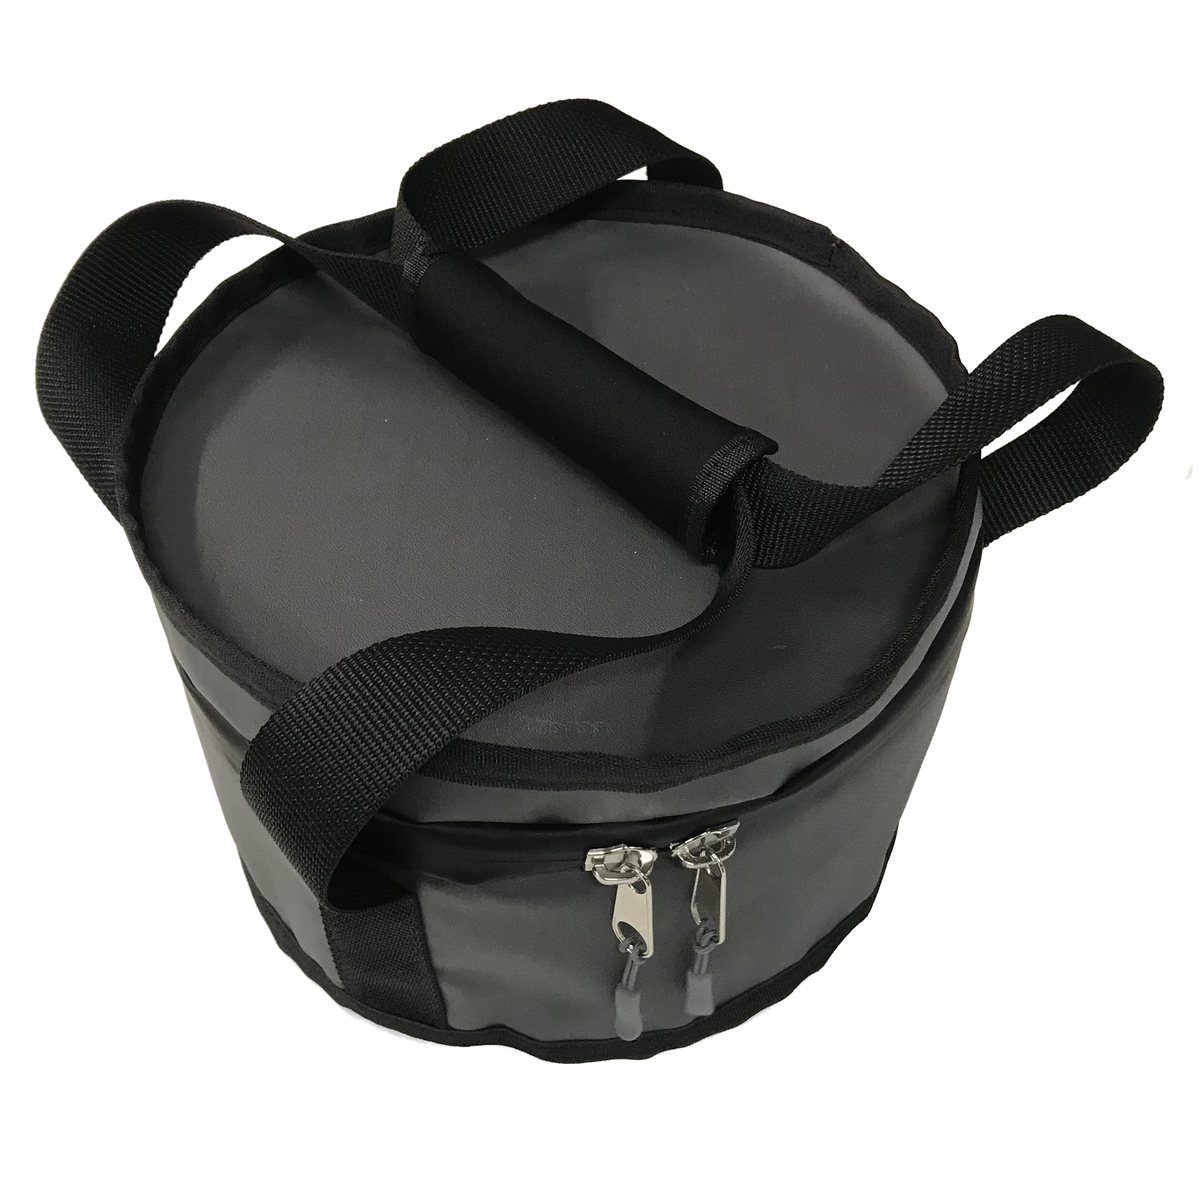 Campfire dutch oven cooking bags